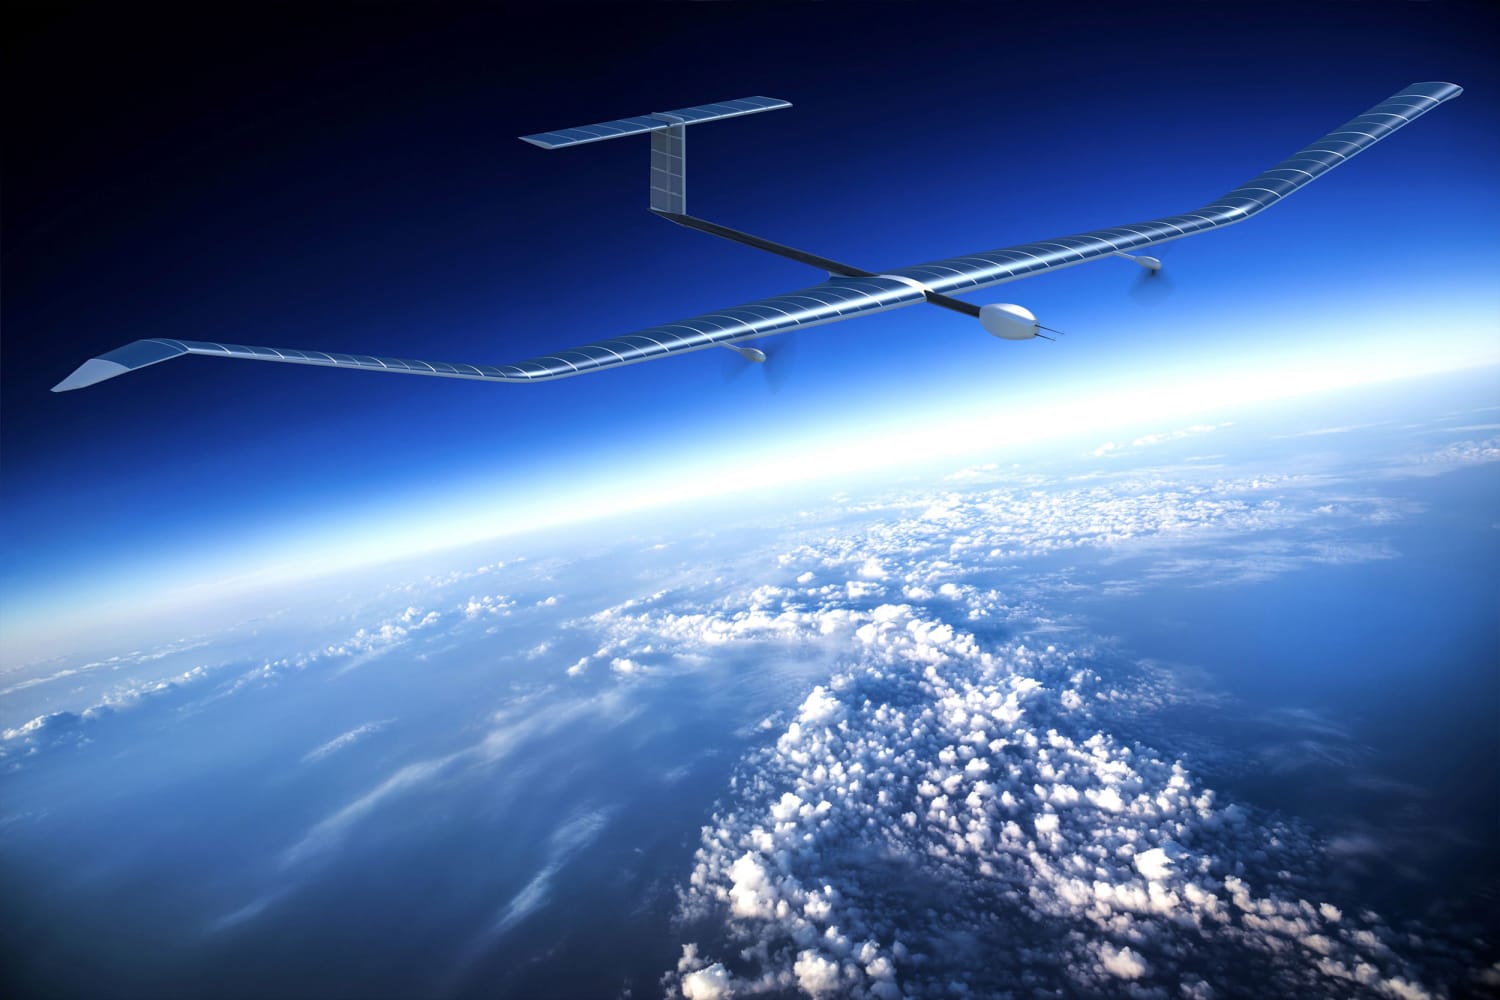 This 'pseudo-satellite' drone fly 70,000 feet up in the sky